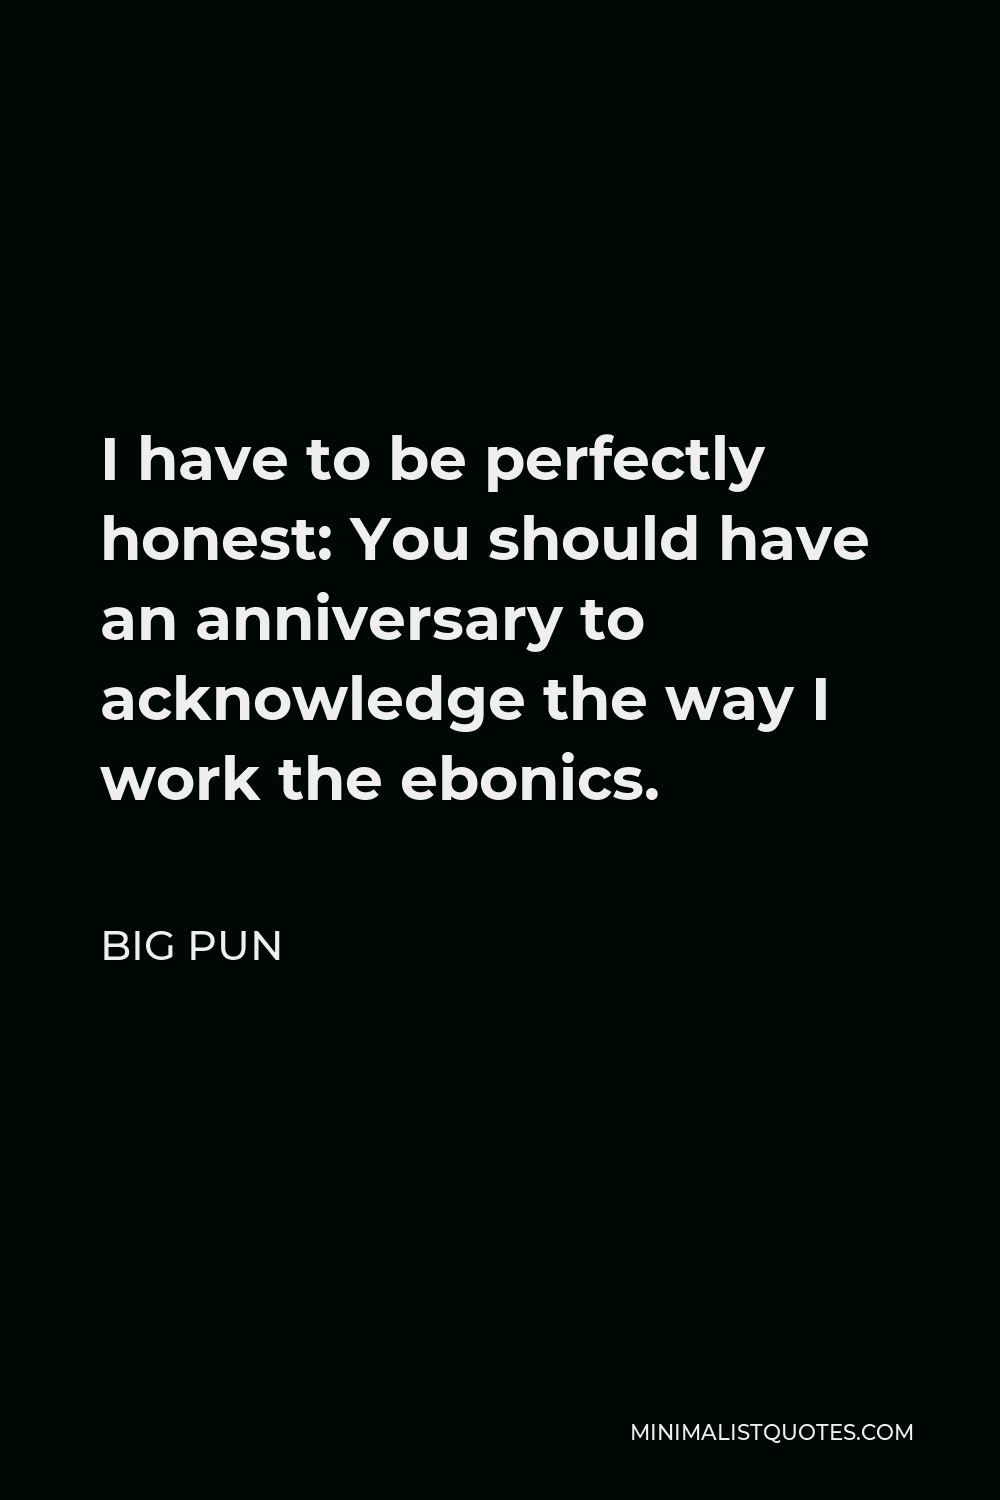 Big Pun Quote - I have to be perfectly honest: You should have an anniversary to acknowledge the way I work the ebonics.